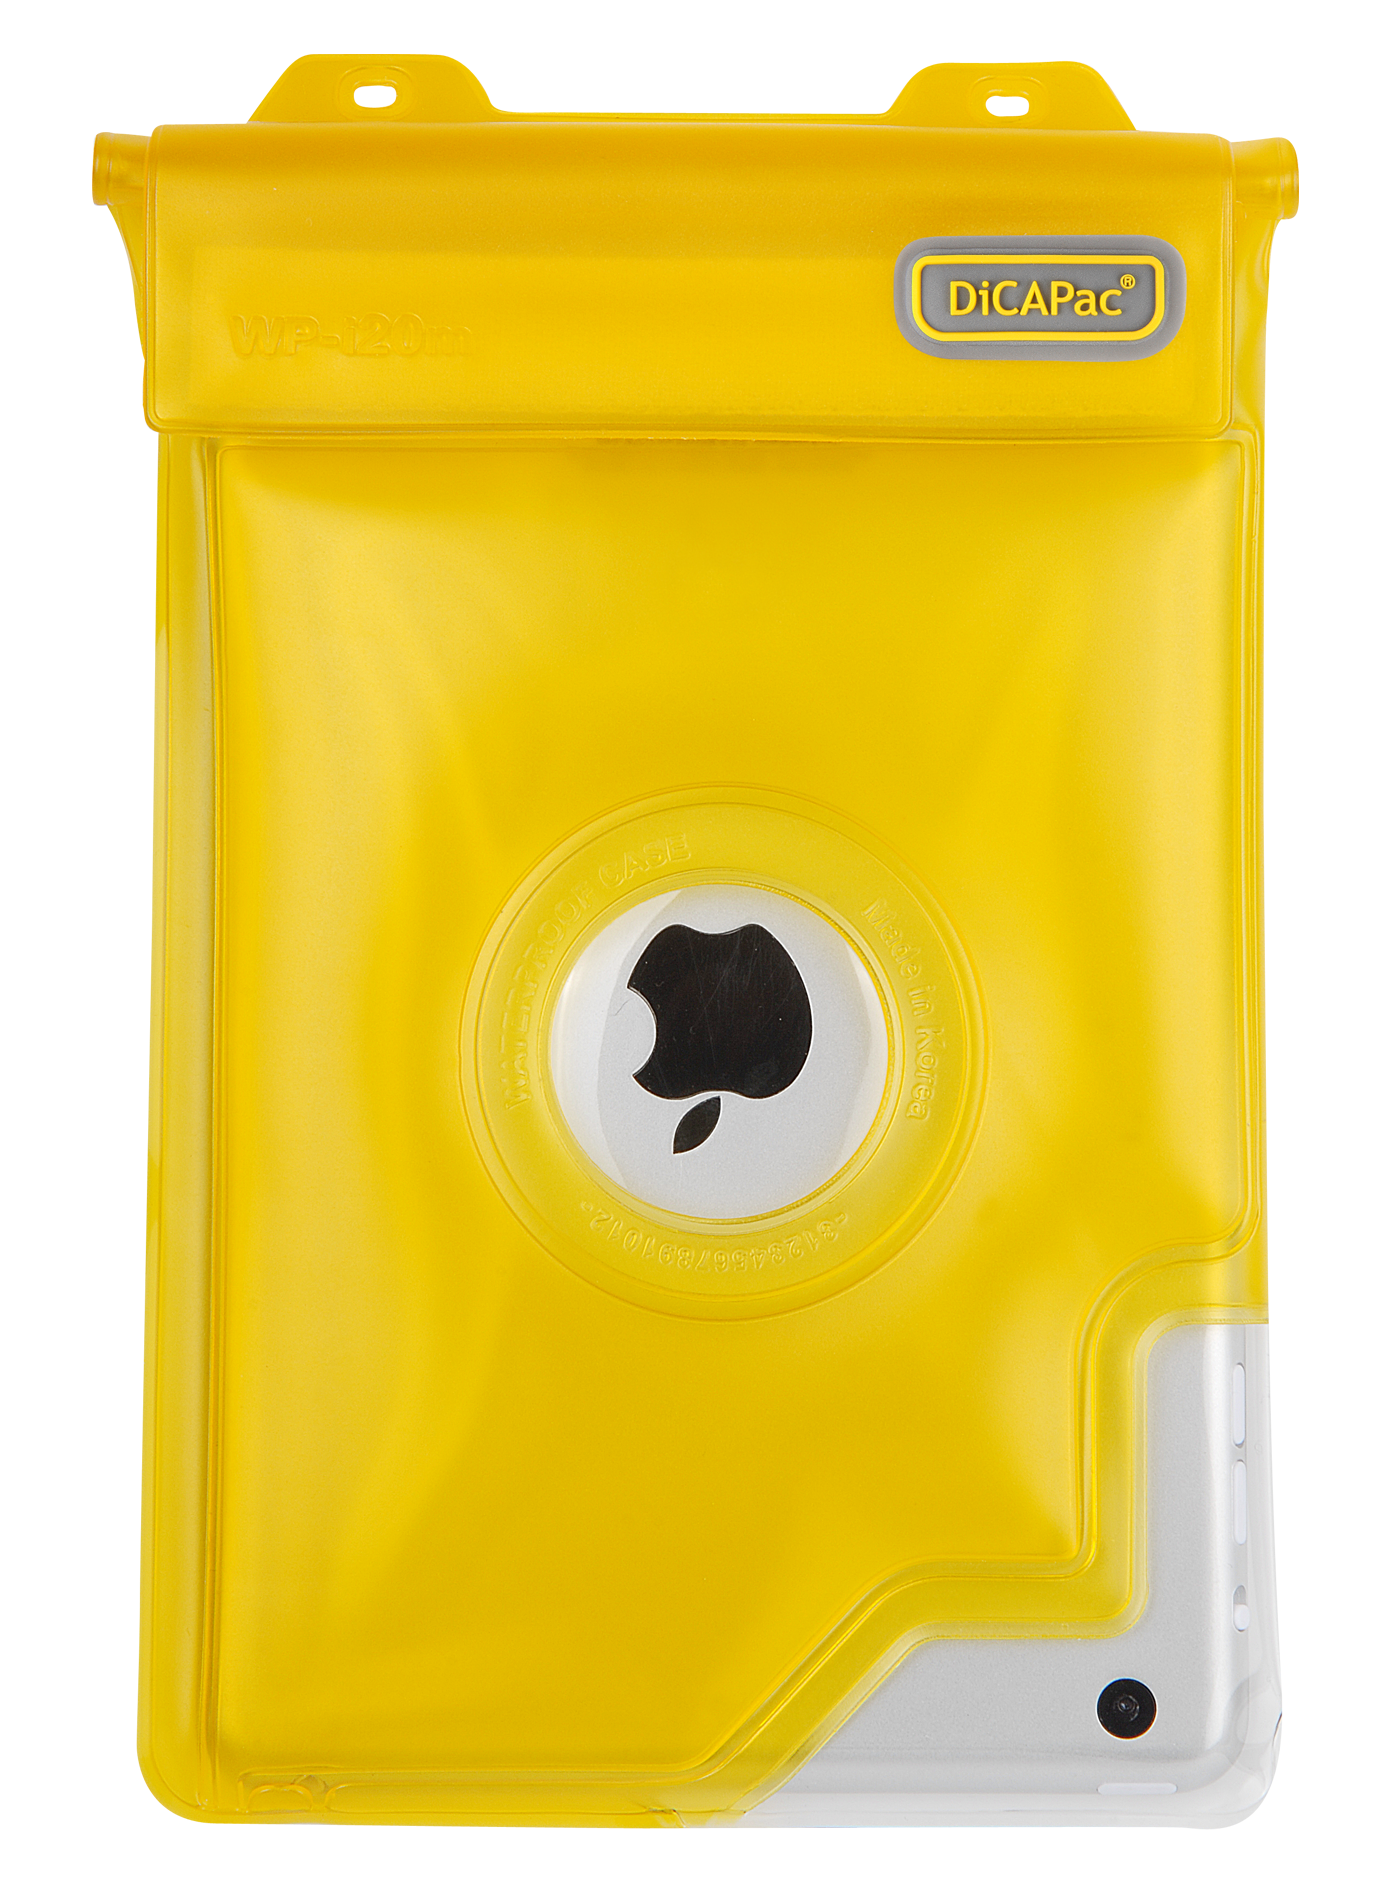 DiCAPac Multipurpose Case, Chest Pouch, Dry Bag waterproof, Yellow